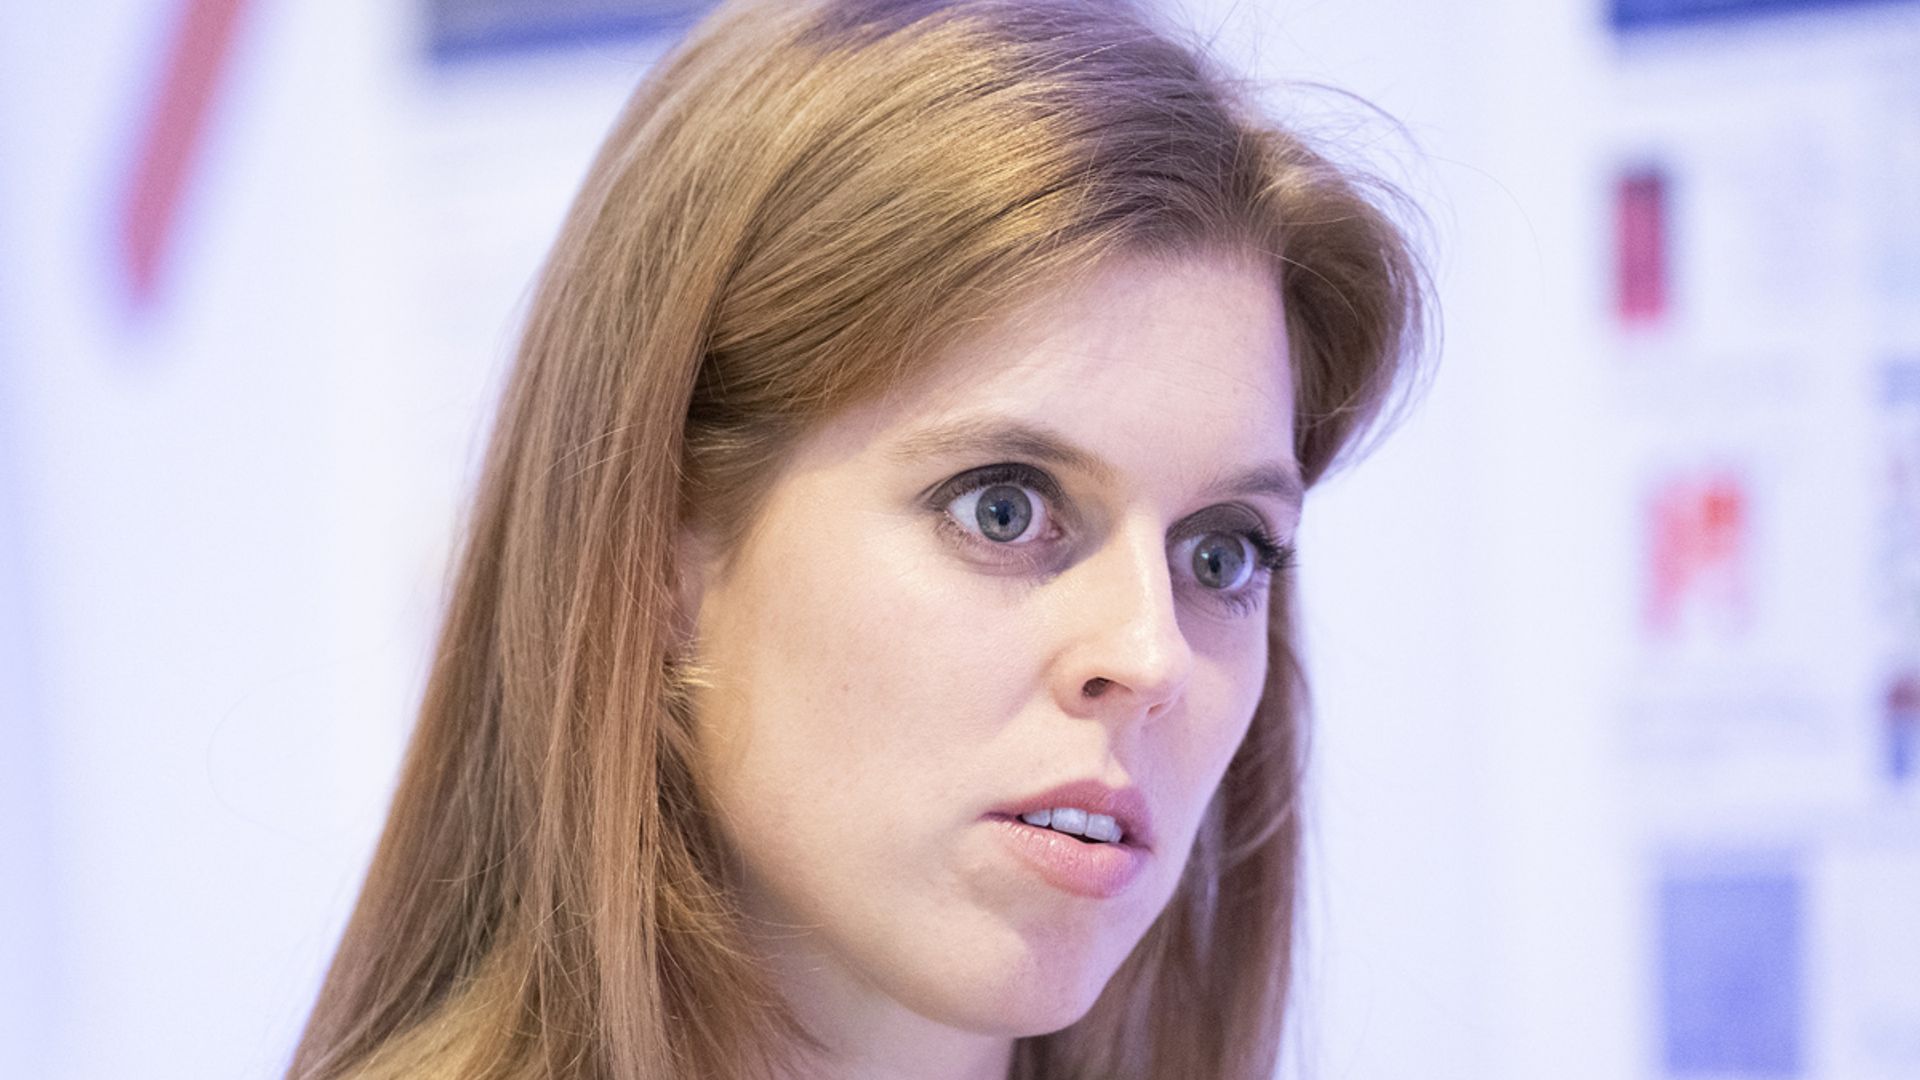 Princess Beatrice stops traffic in £19 ASOS dress - wait 'til you see it